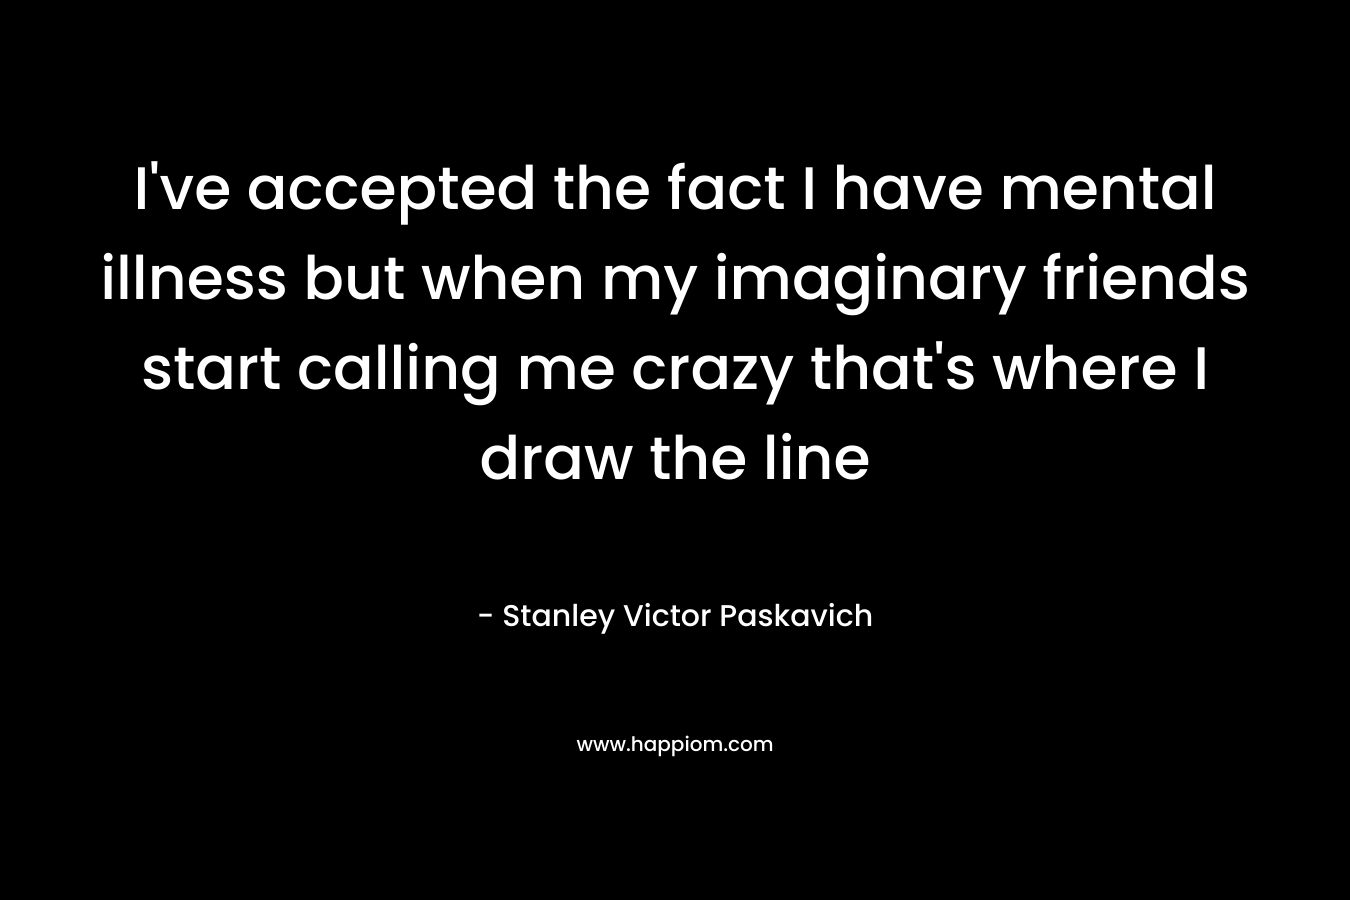 I’ve accepted the fact I have mental illness but when my imaginary friends start calling me crazy that’s where I draw the line – Stanley Victor Paskavich